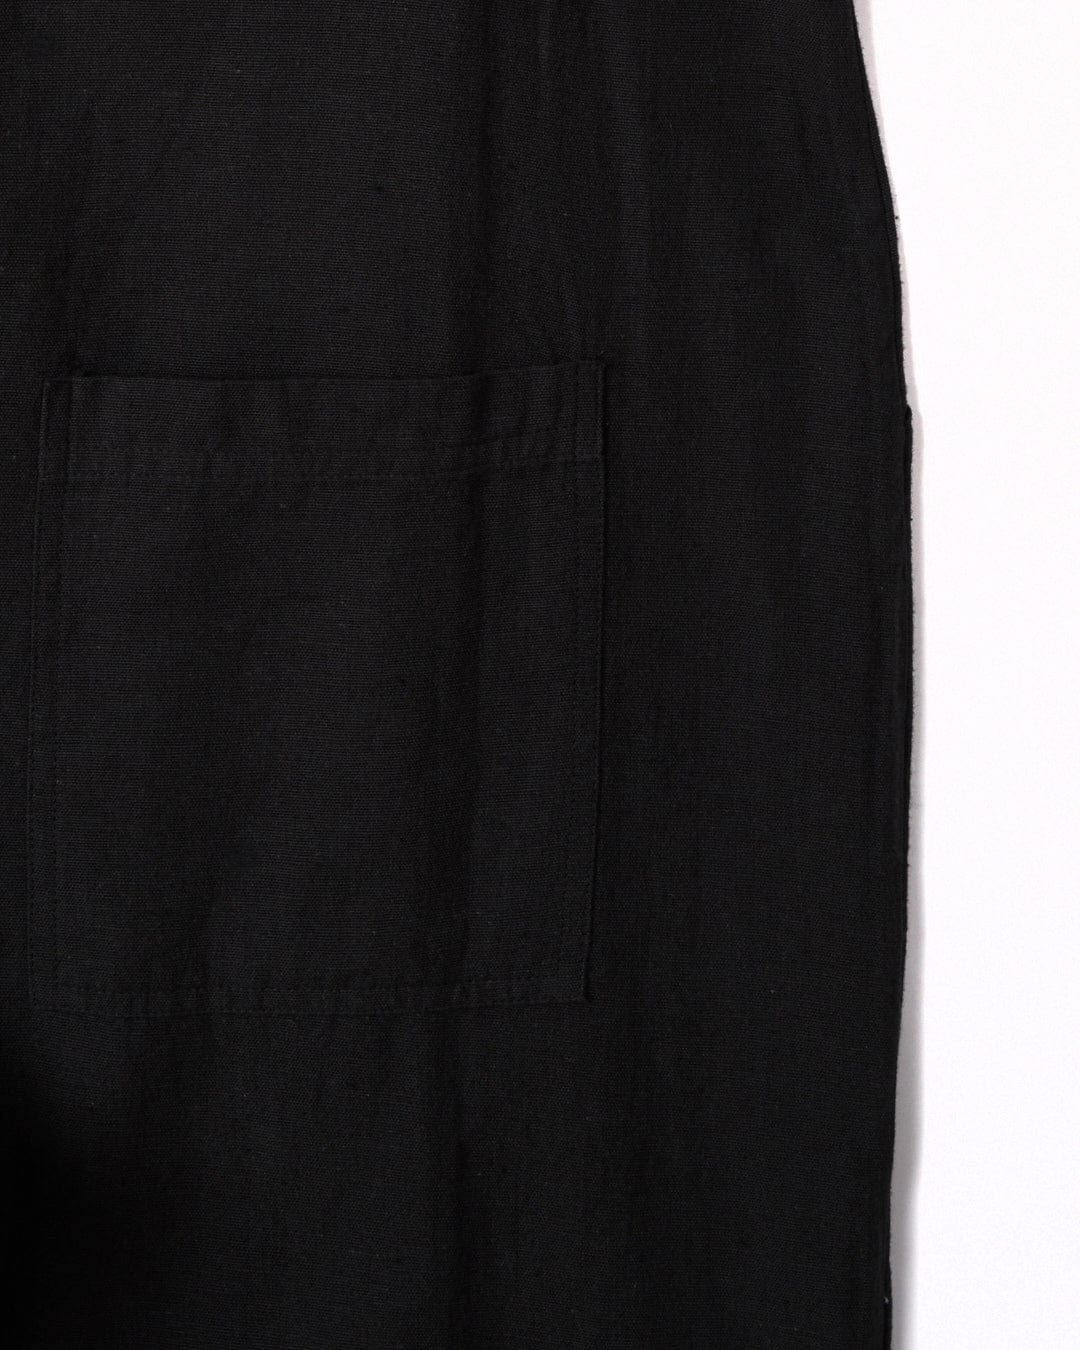 Close-up of a black cotton fabric with a square stitched pocket on it. The pocket is centered in the image, revealing the texture and seam details of the Nancy - Womens Dungarees - Dark Grey by Saltrock.